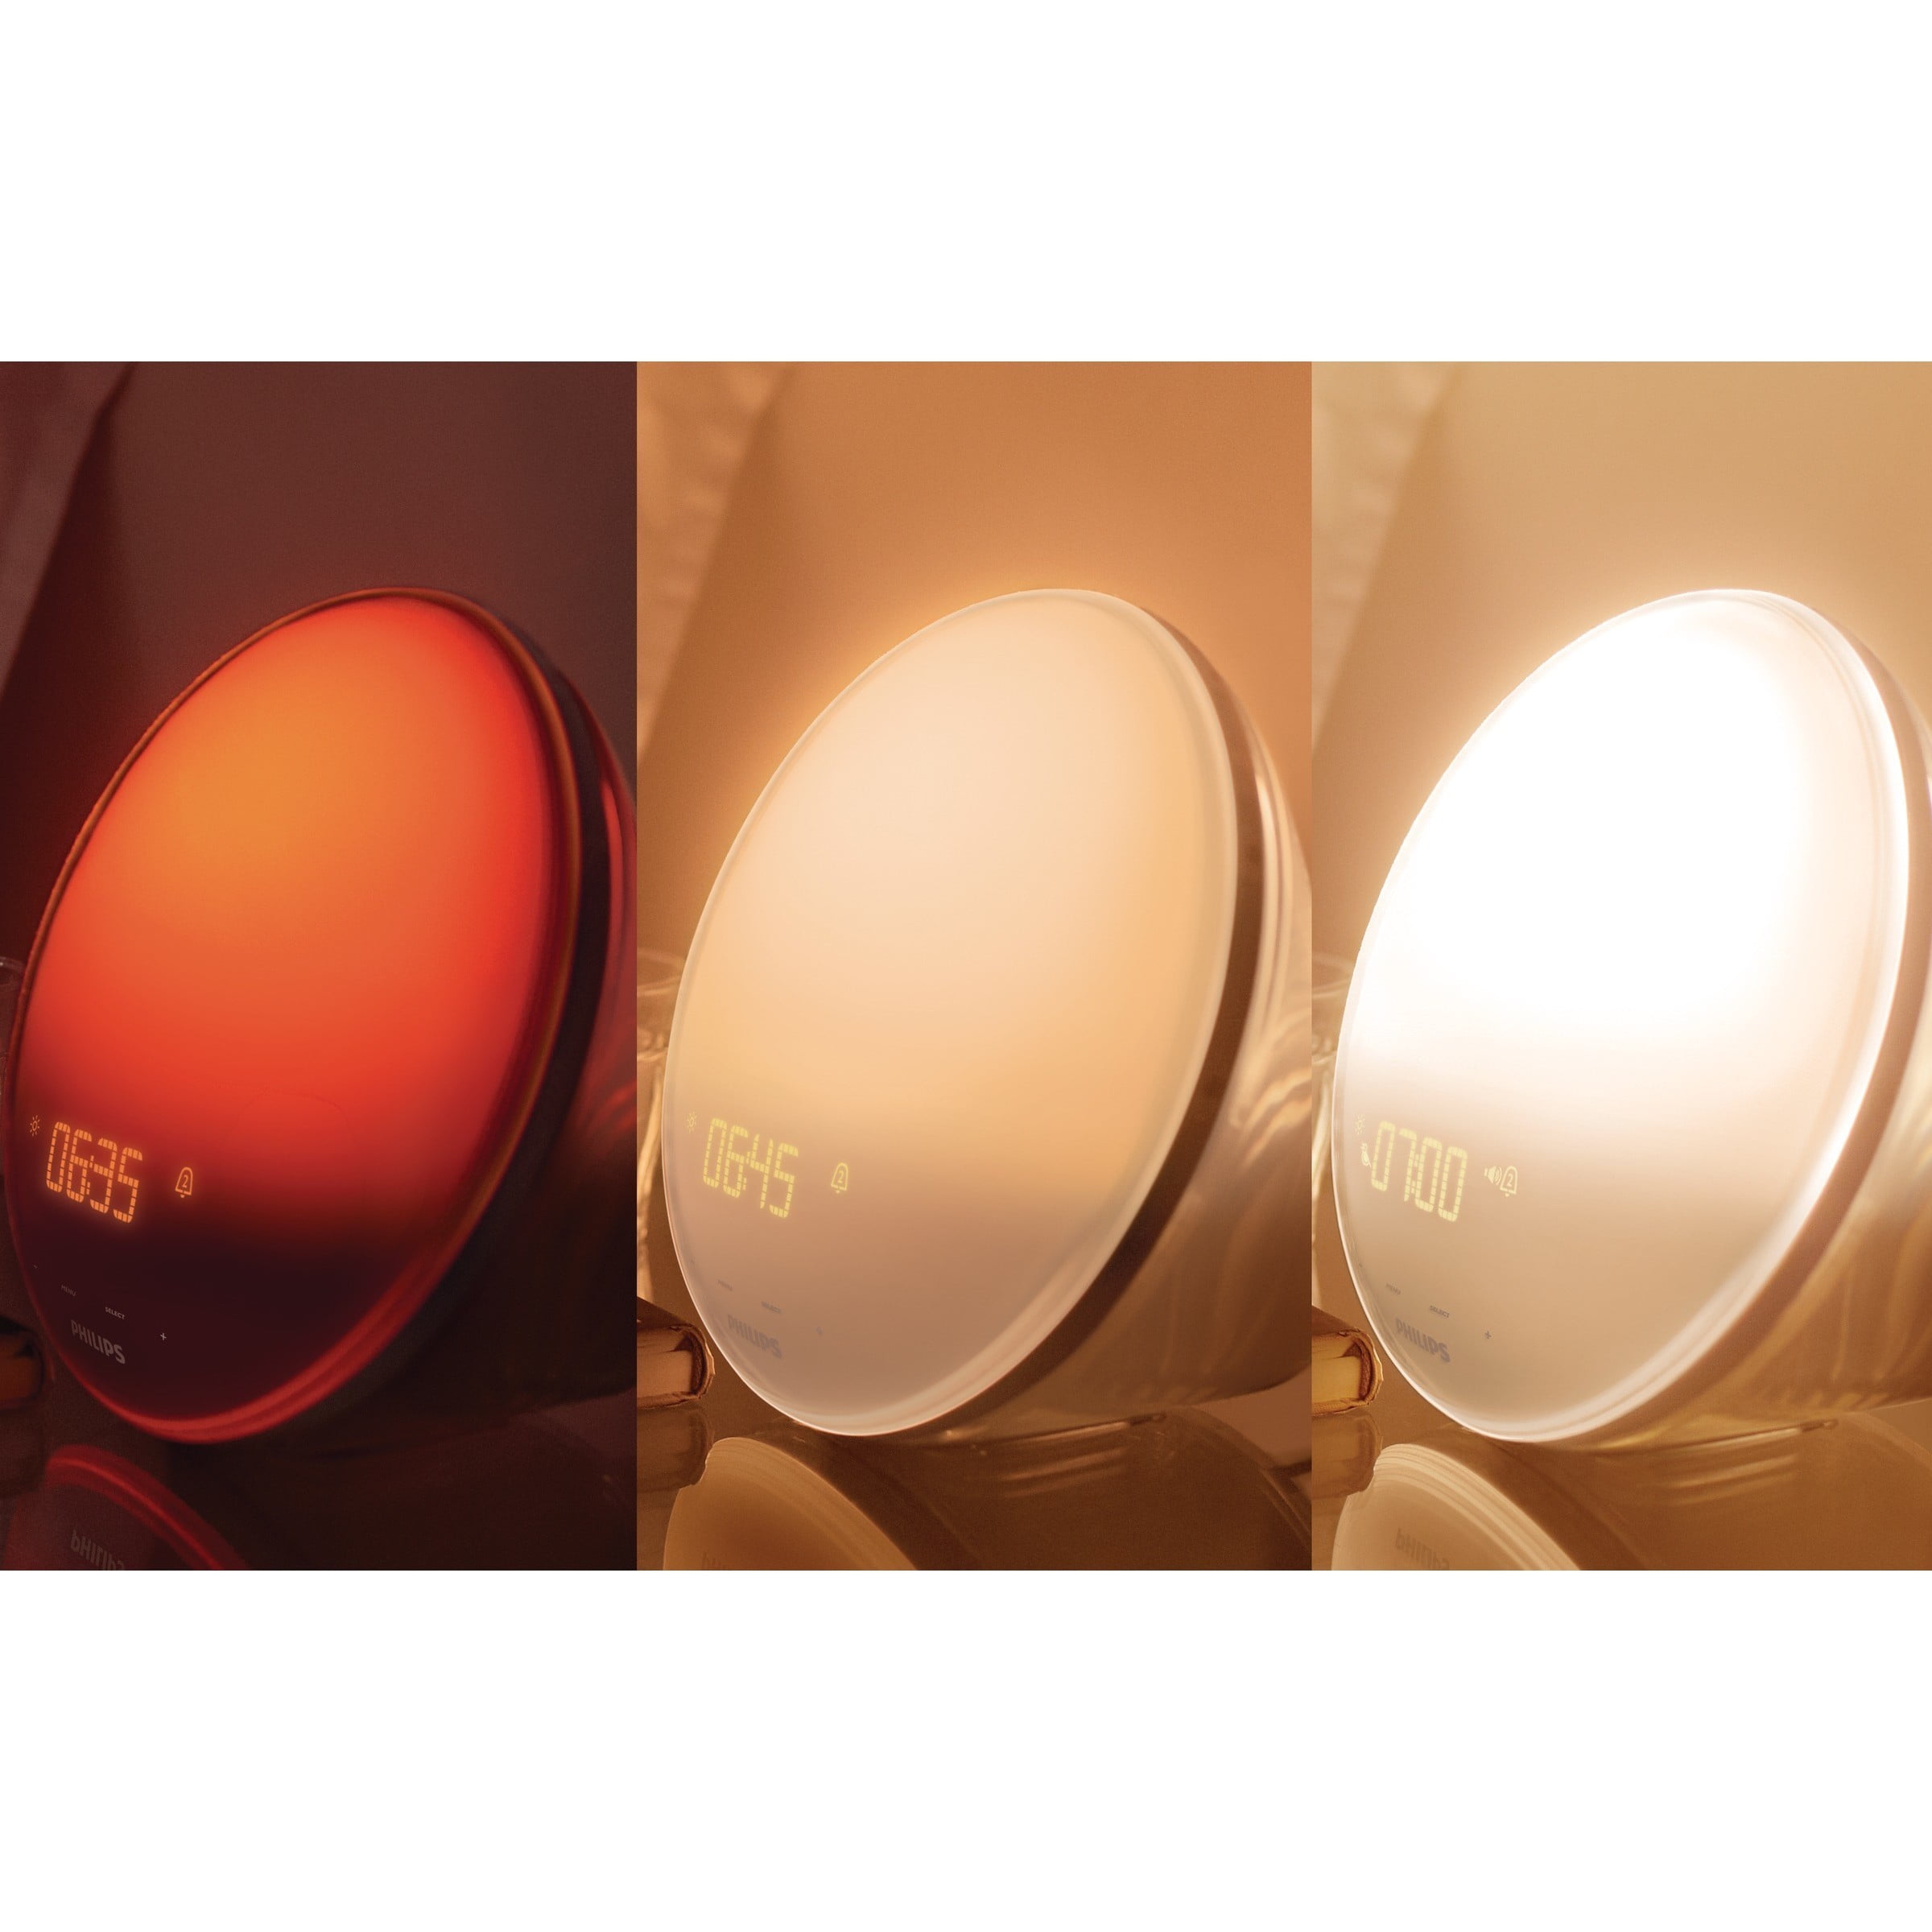 Philips Wake-up Light with Colored Sunrise, Sunset Simulation New Feature, - Walmart.com